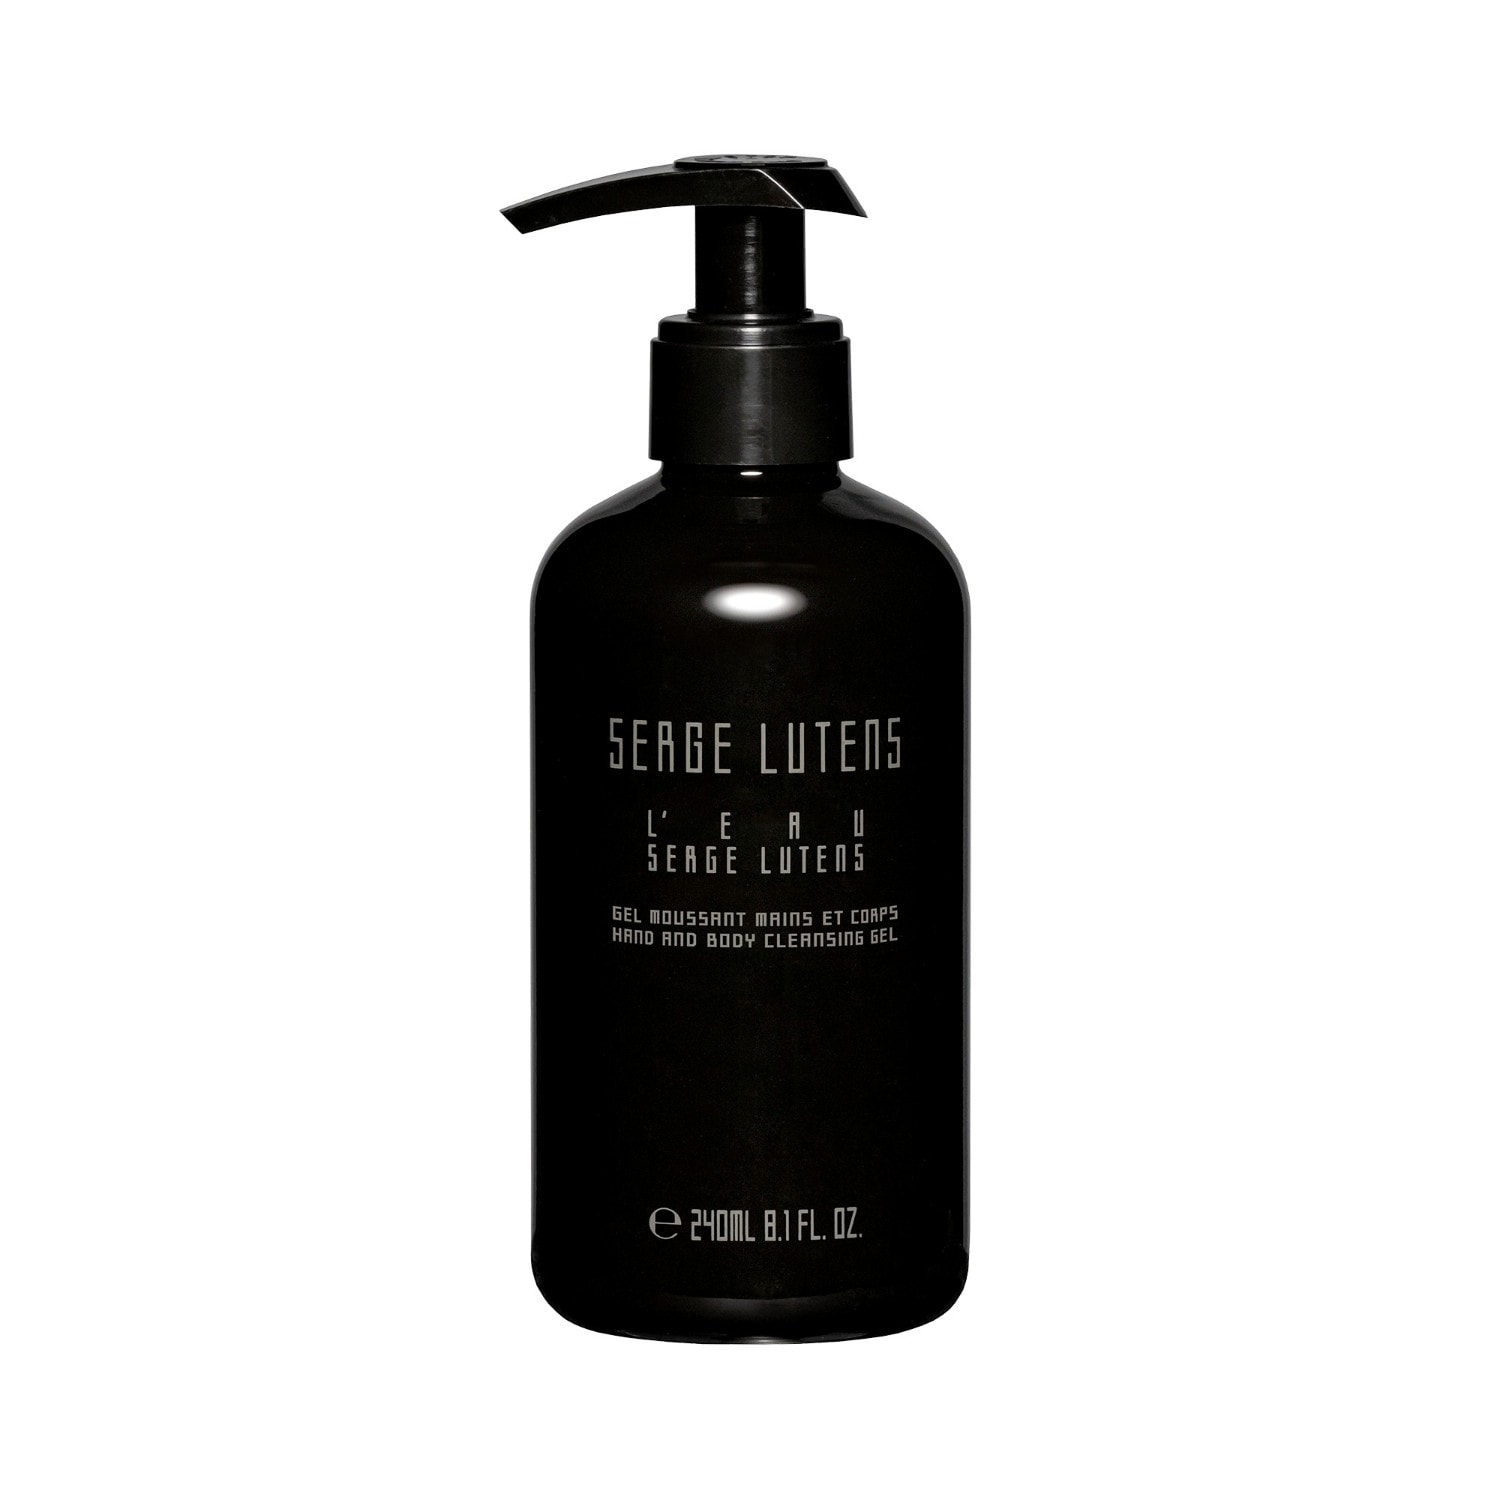 Matin Lutens LEau Serge Lutens Hand and Body Cleansing Gel